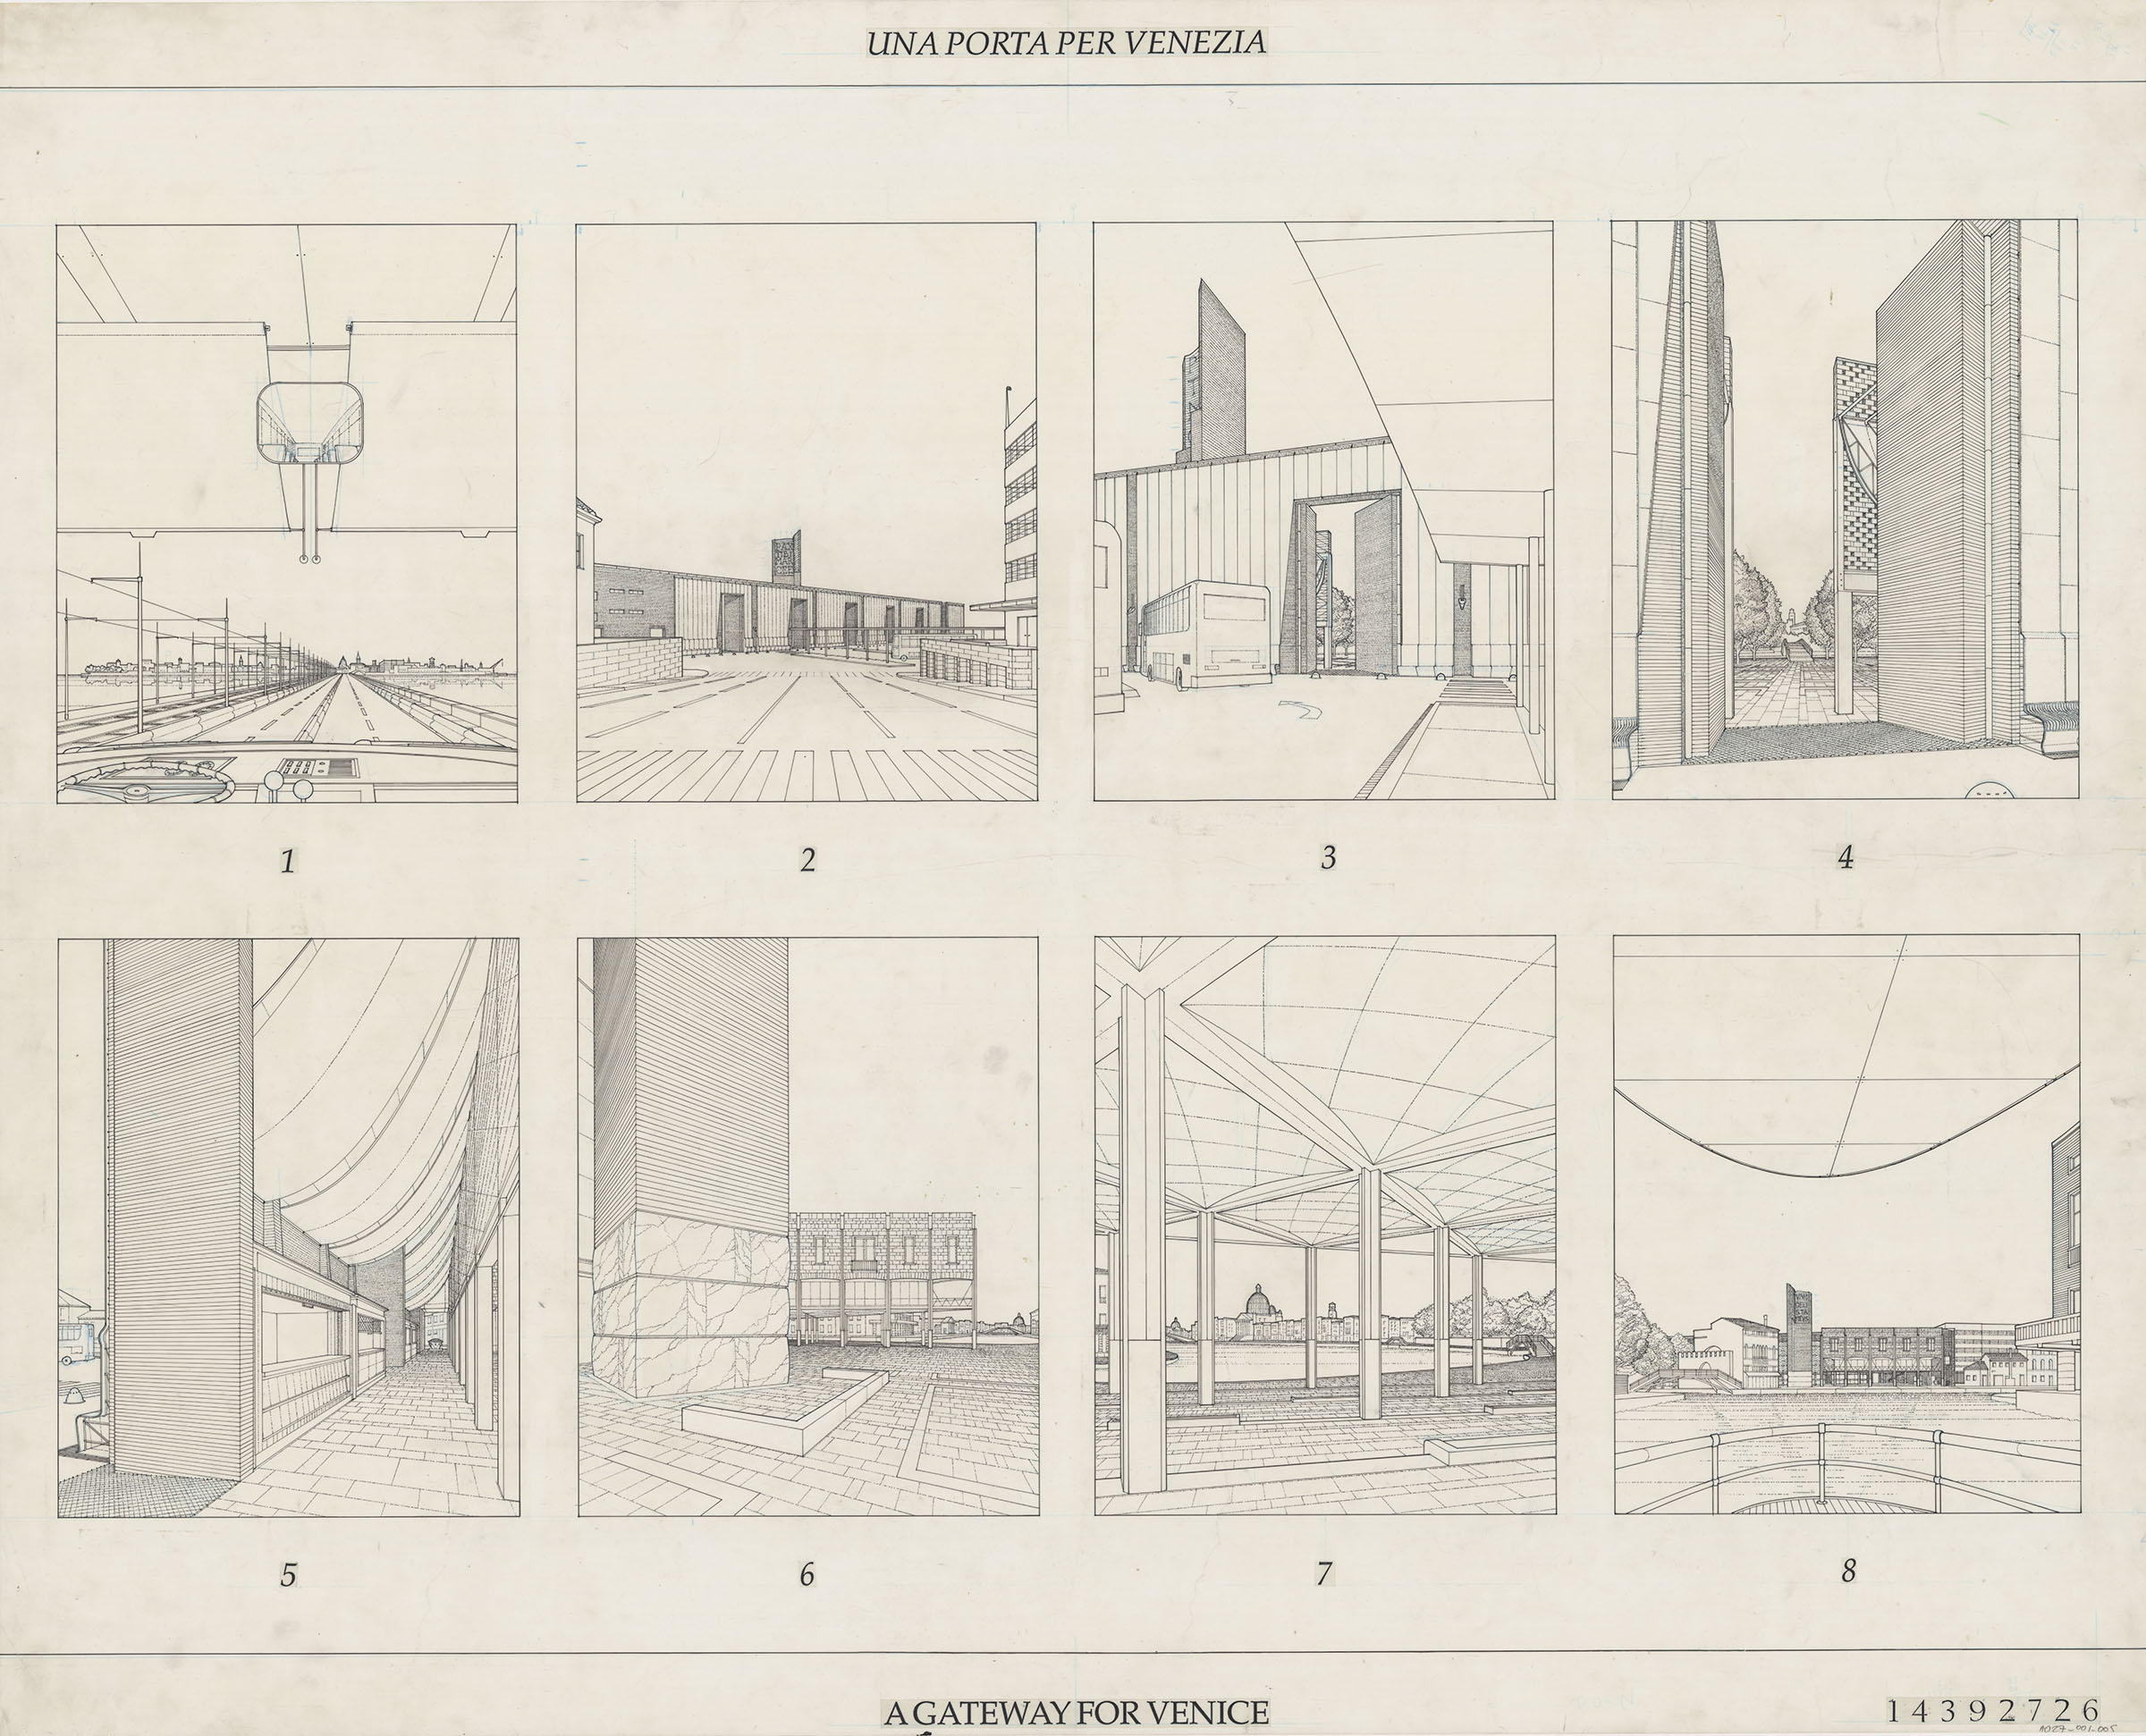 Eight Drawings of various views of fanciful architecture proposal